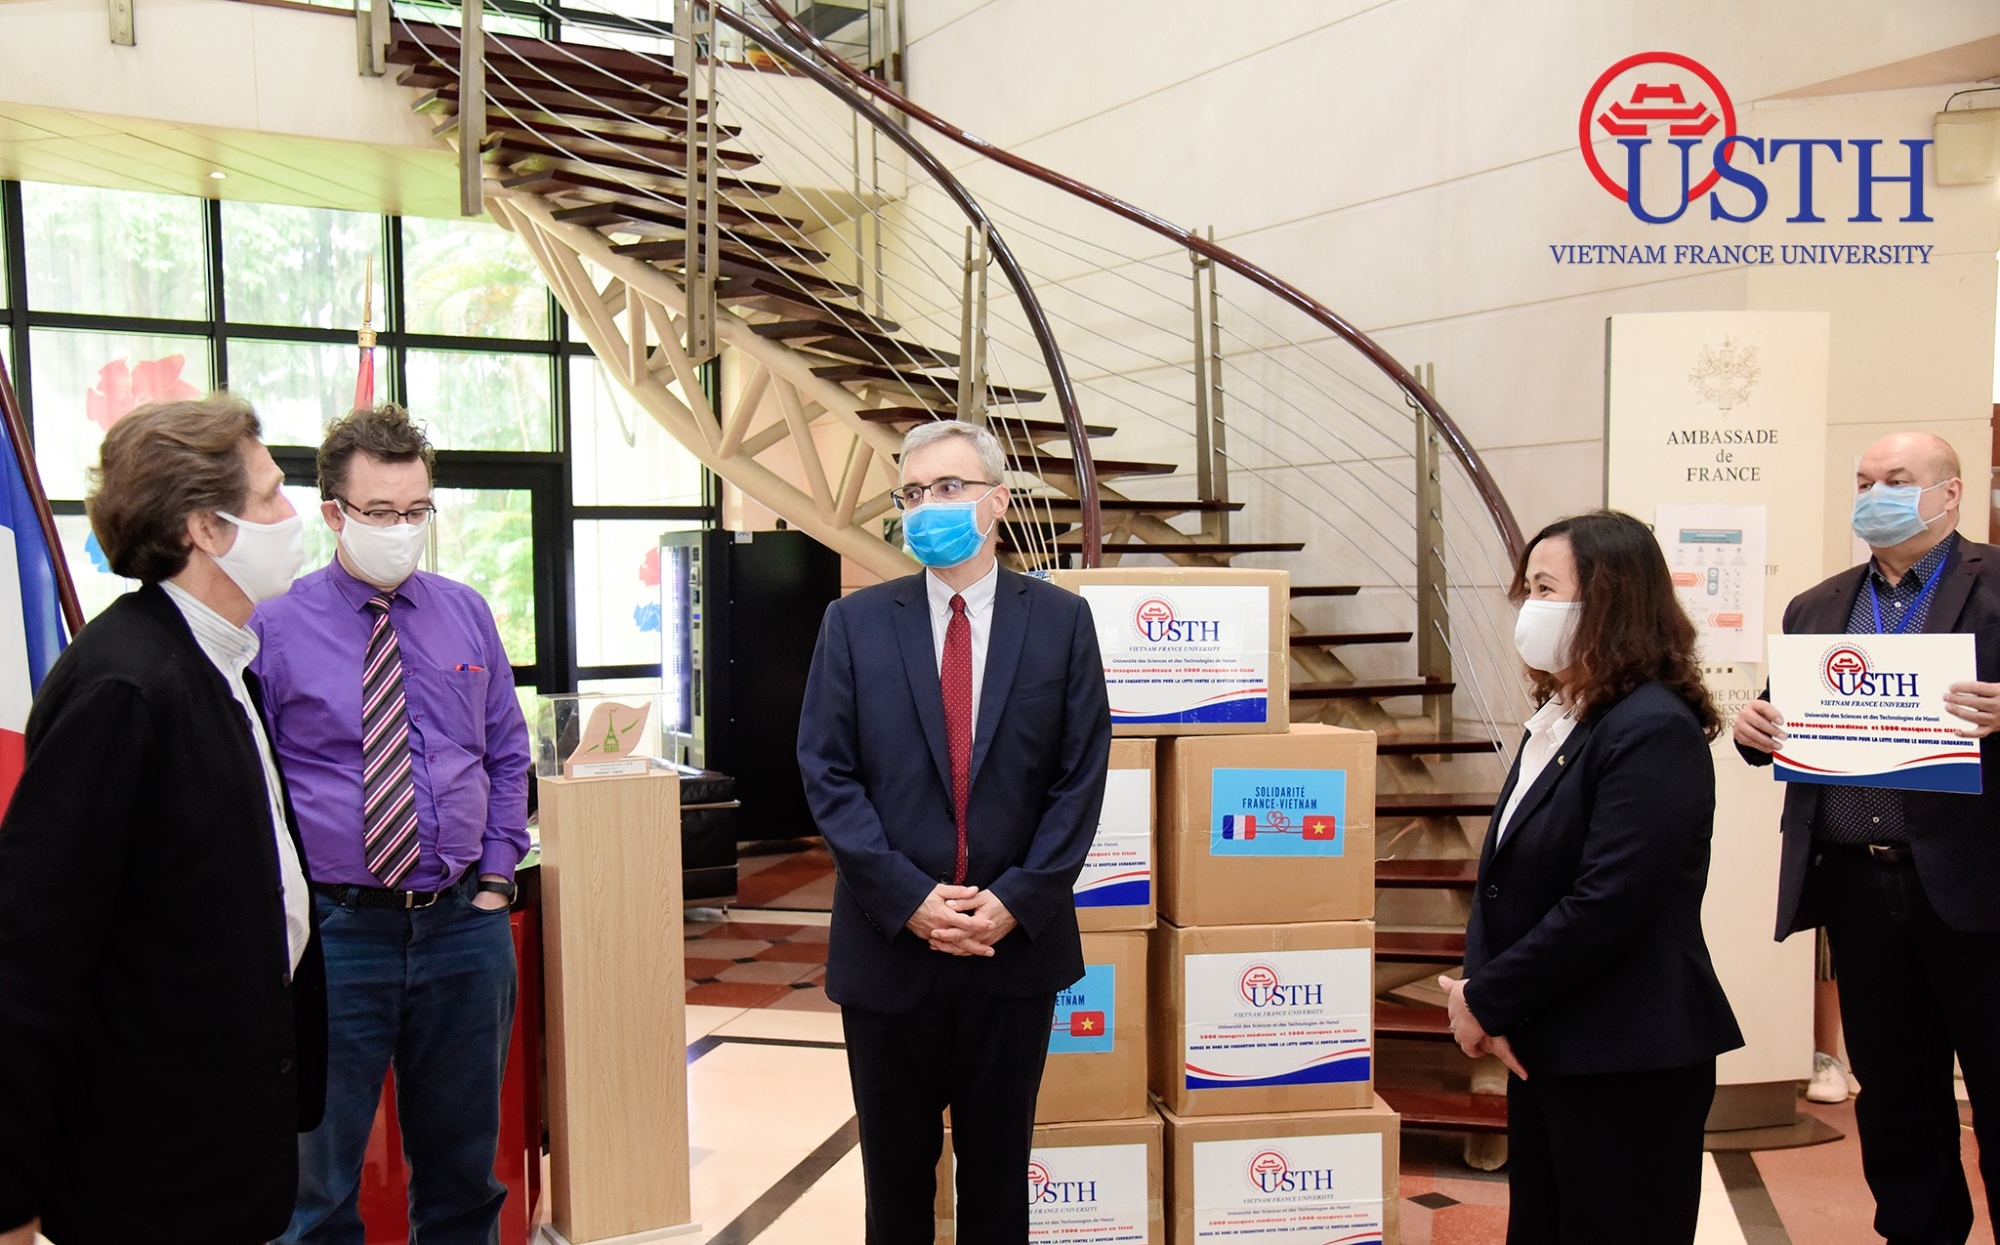 usth gifted 10 000 facemasks to french partners 1